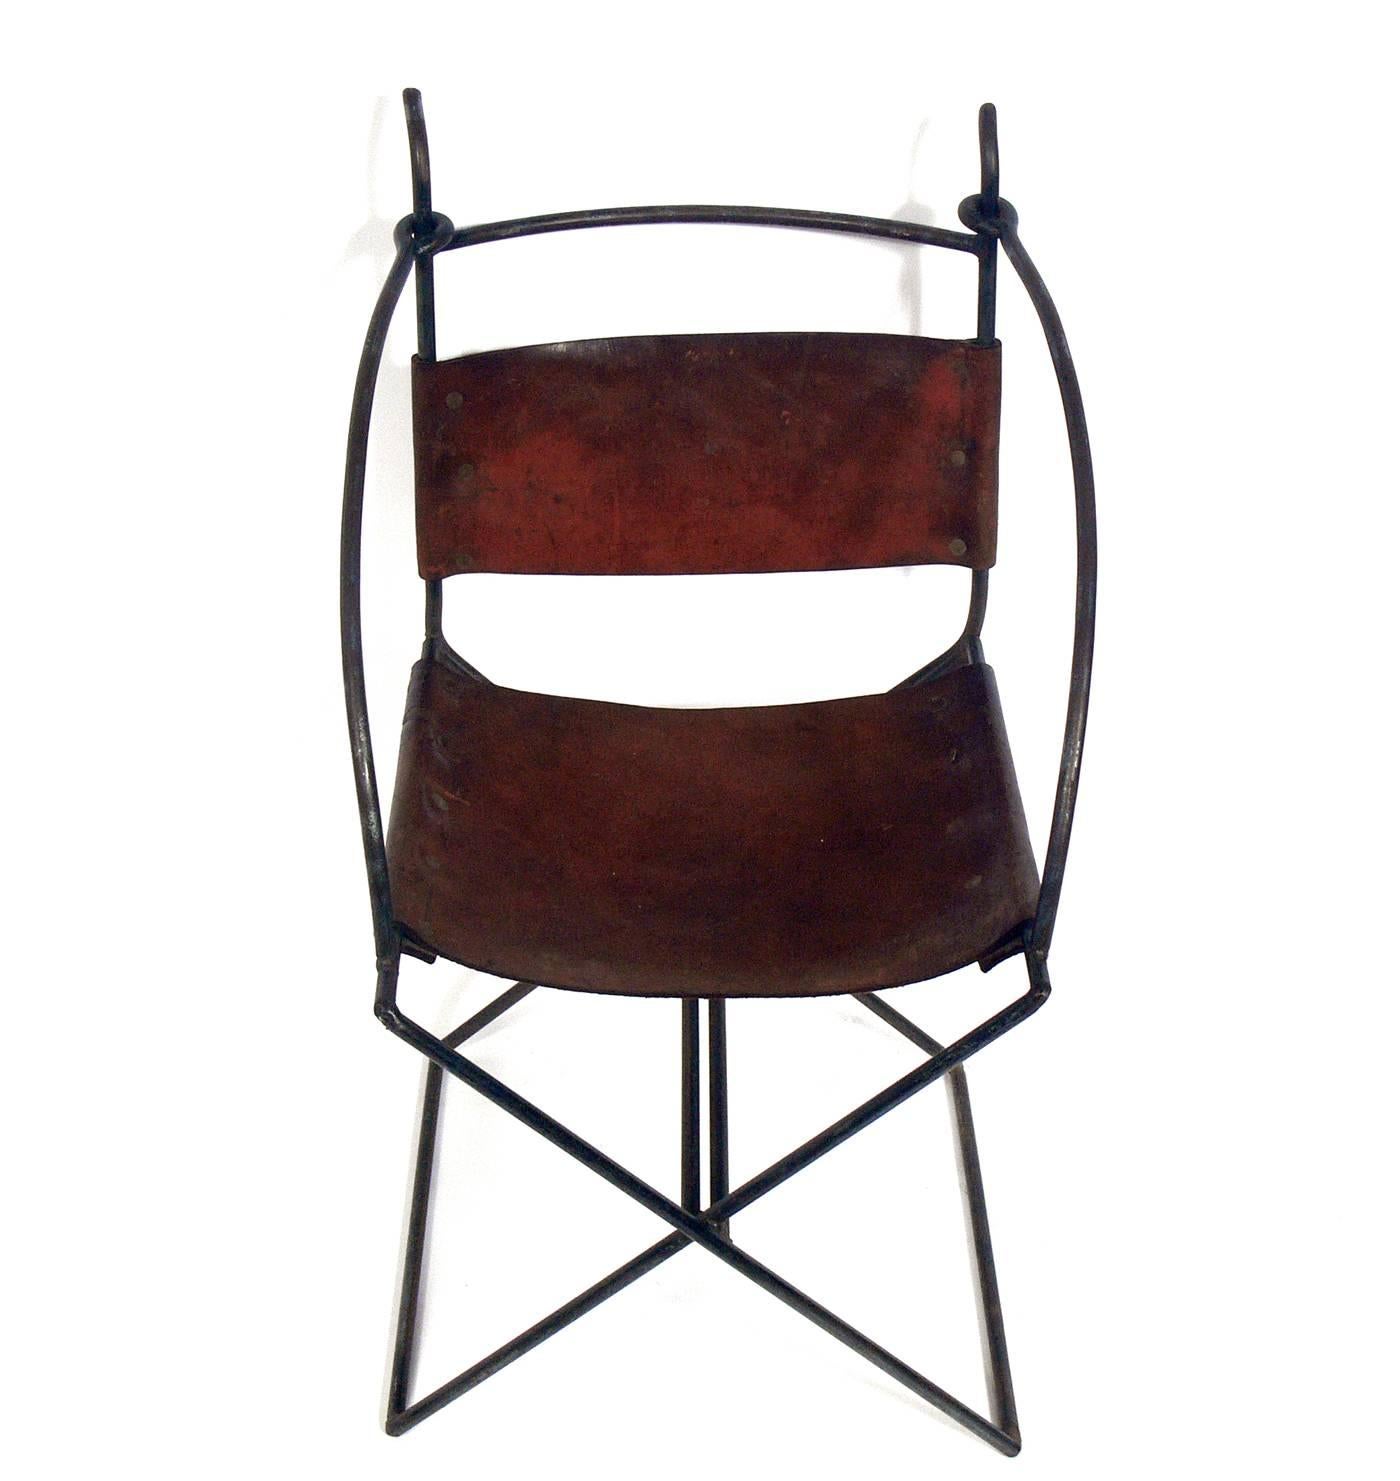 Rustic modern iron and leather chair, American, circa 1960s. Handmade by a Vermont artist in the 1960s, this chair retains its warm original patina to the iron frame and thick cognac color saddle leather.